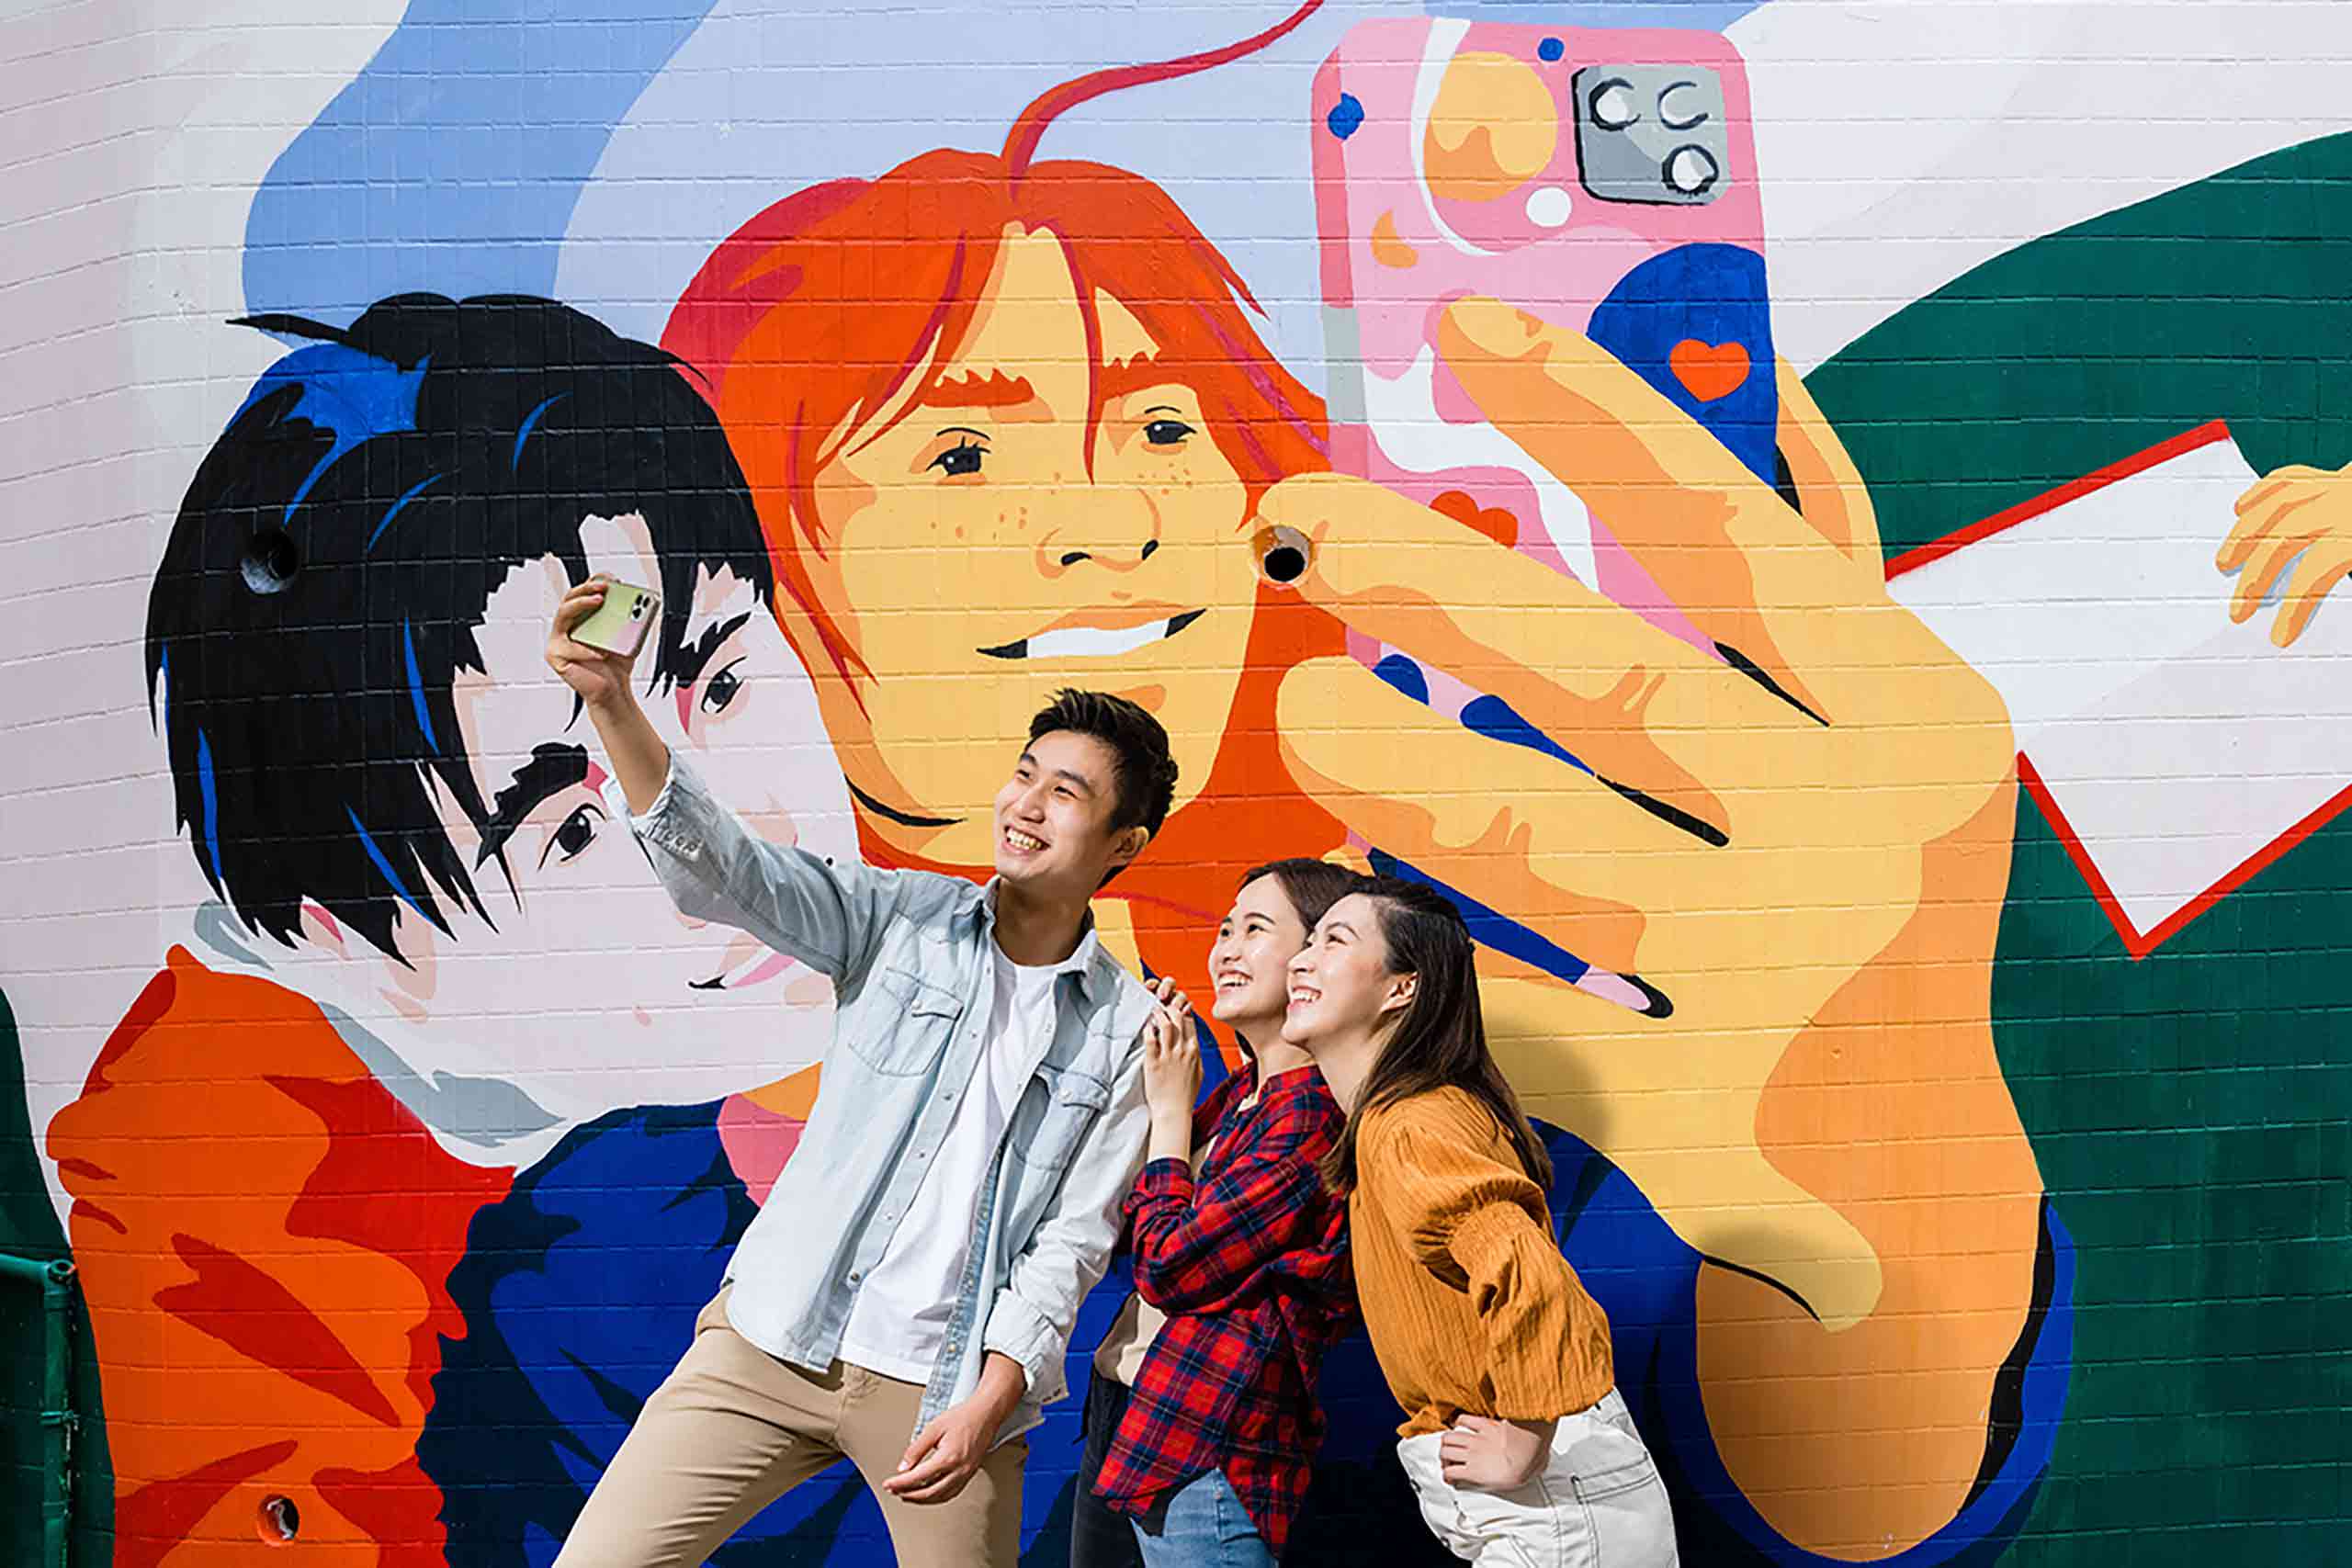 A young group of friends take a selfie in front of an art mural.